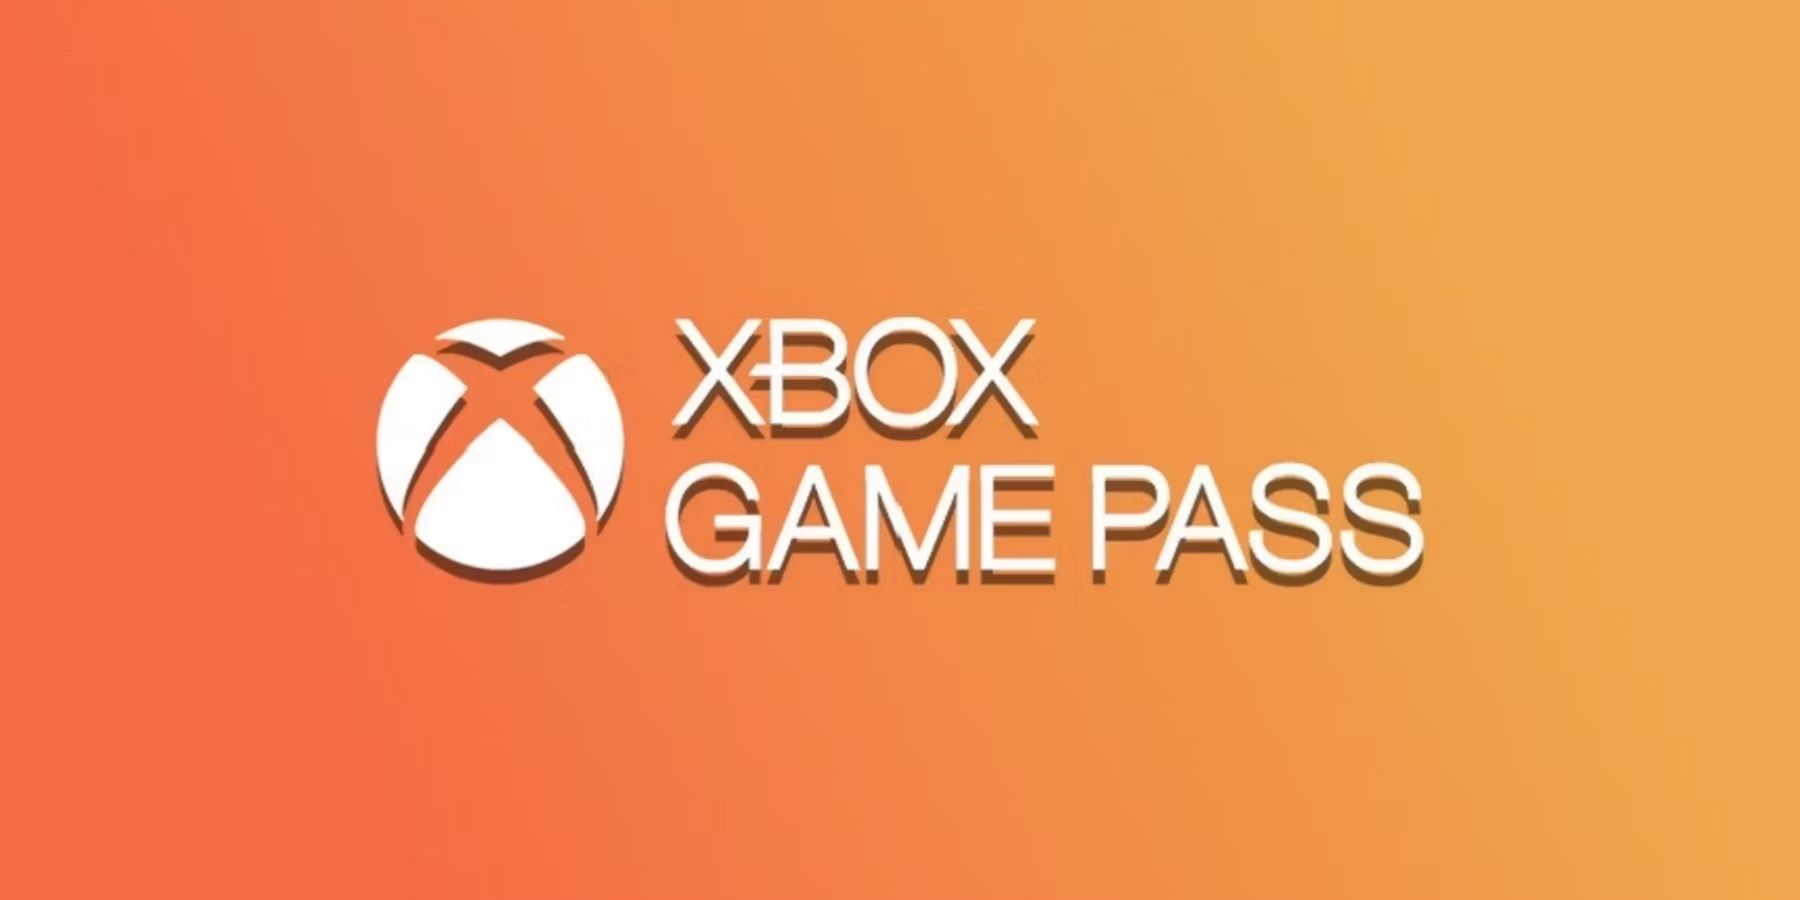 Coming Soon to Xbox Game Pass: Amnesia: The Bunker, Car Mechanic